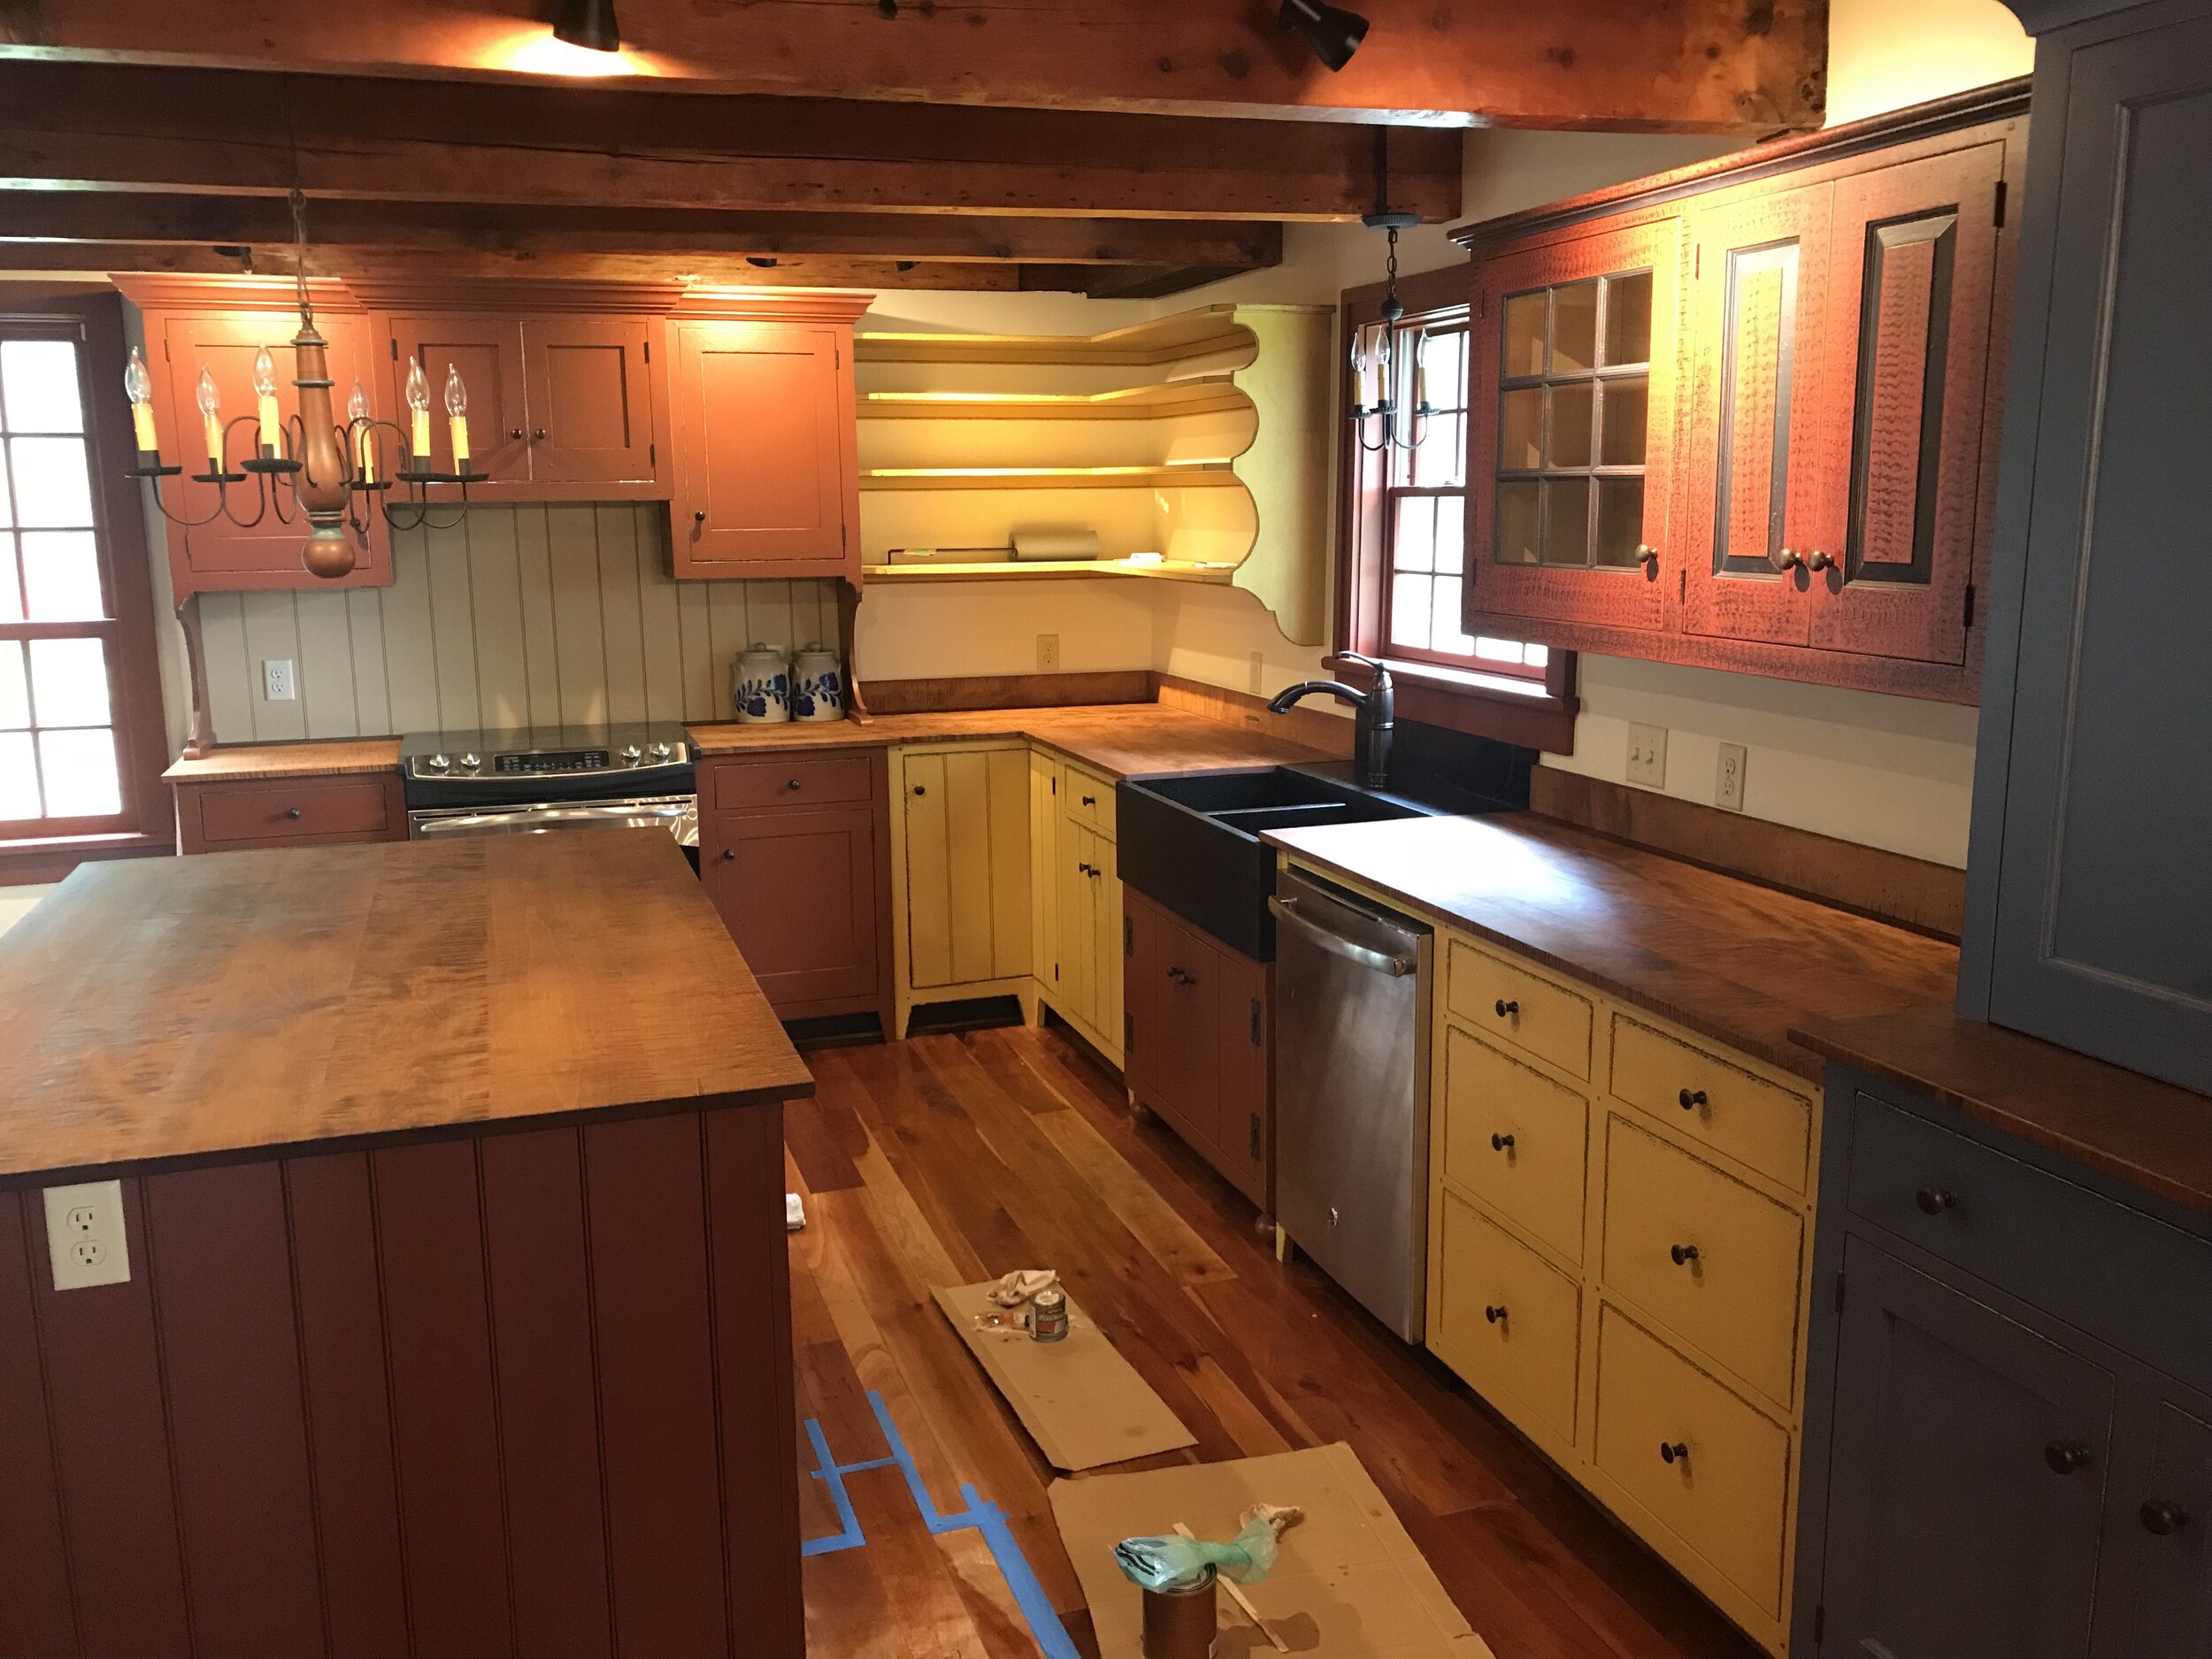 Historically-matched Kitchen and Trim Remodel